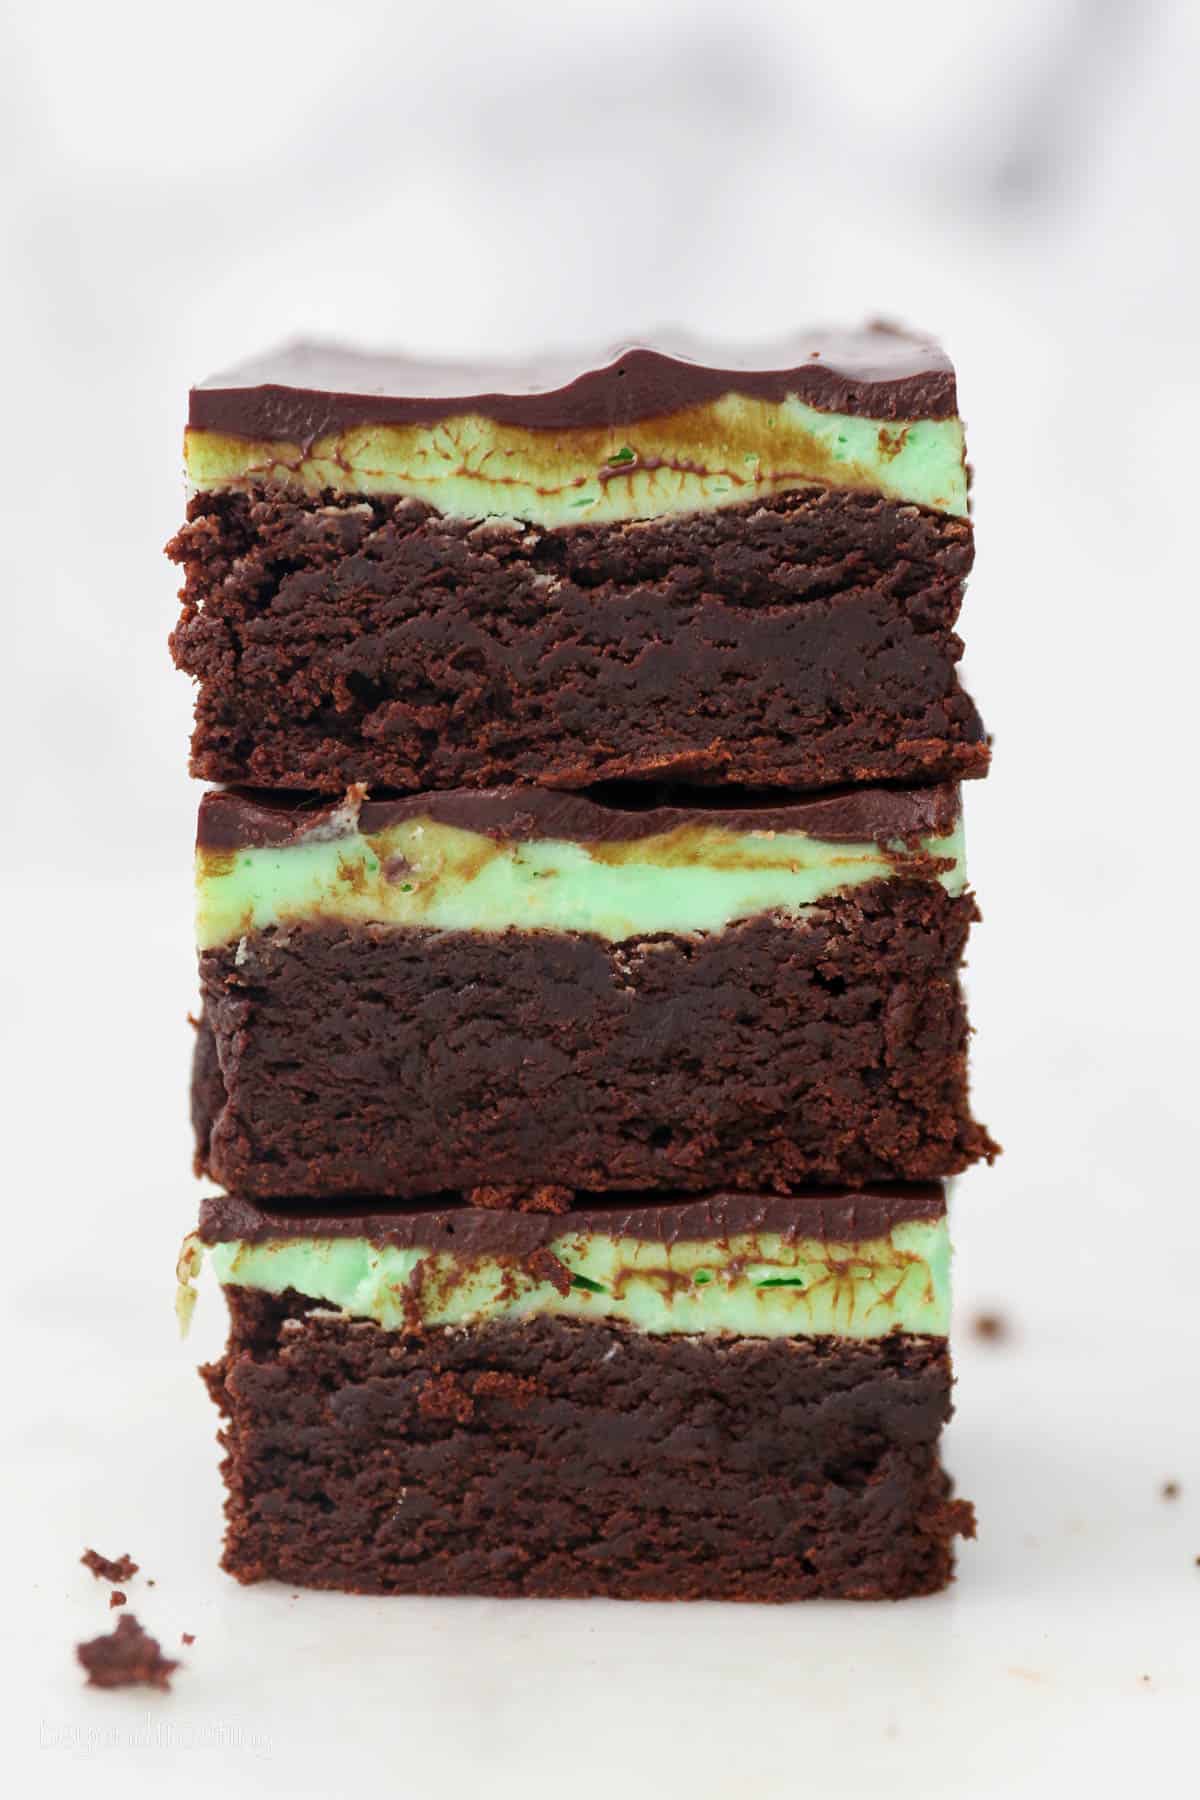 Three mint chocolate brownies stacked on top of one another.